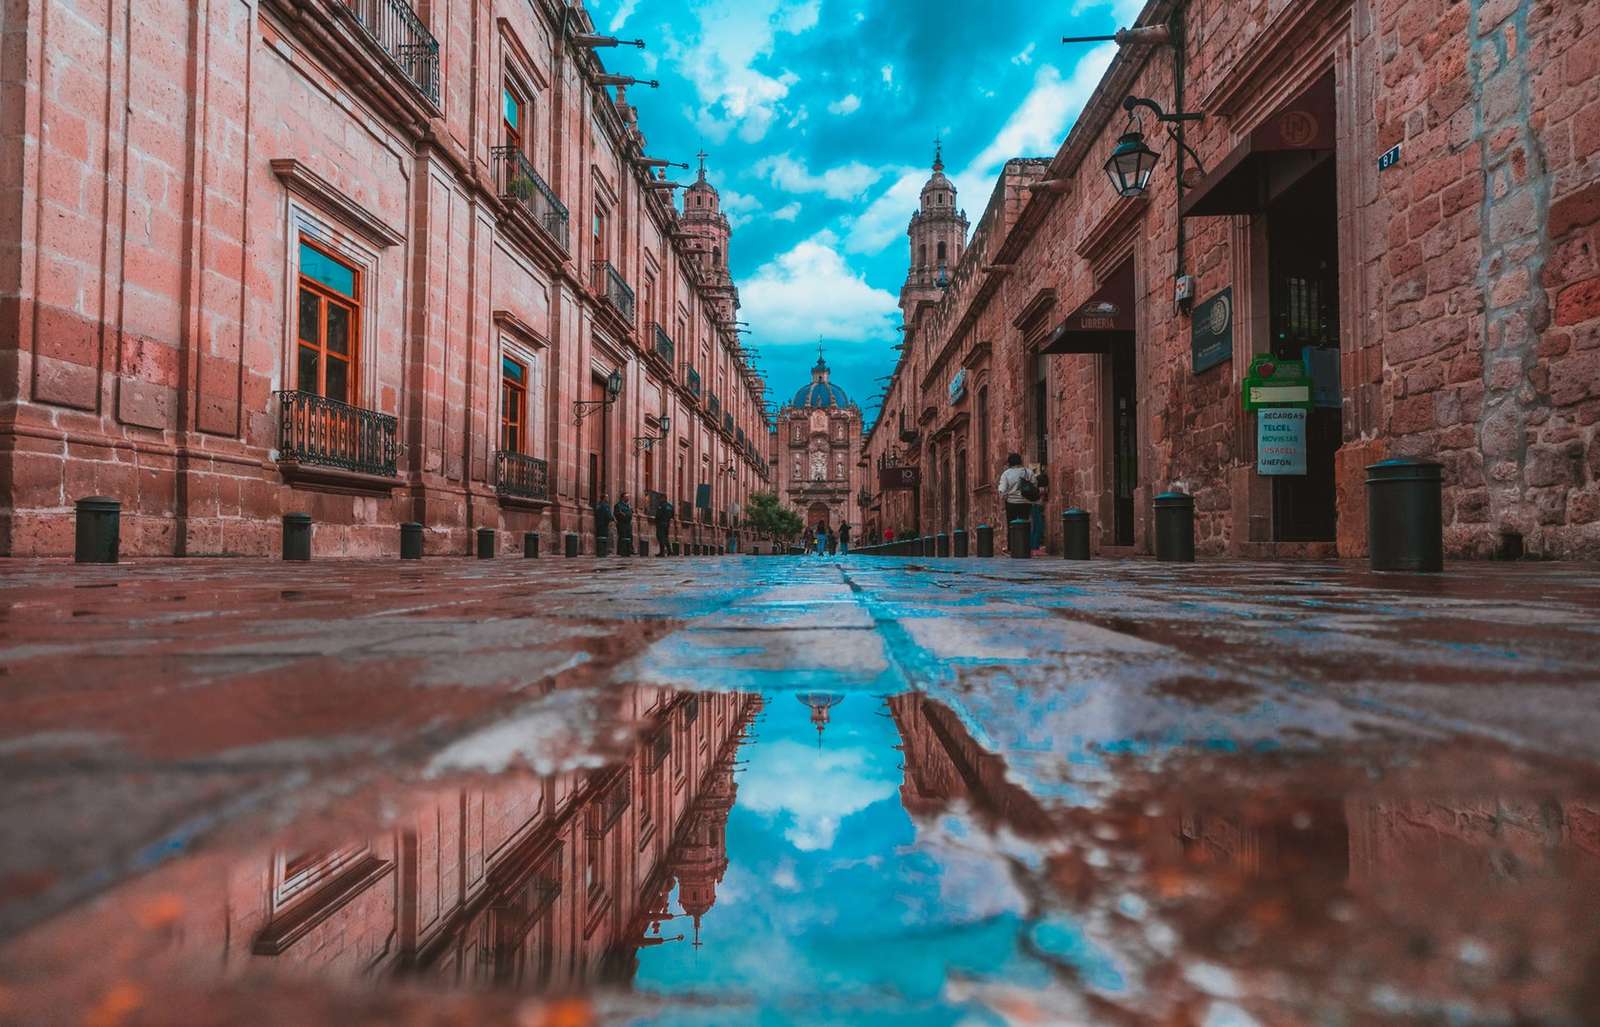 A city in Mexico - Morelia jigsaw puzzle online